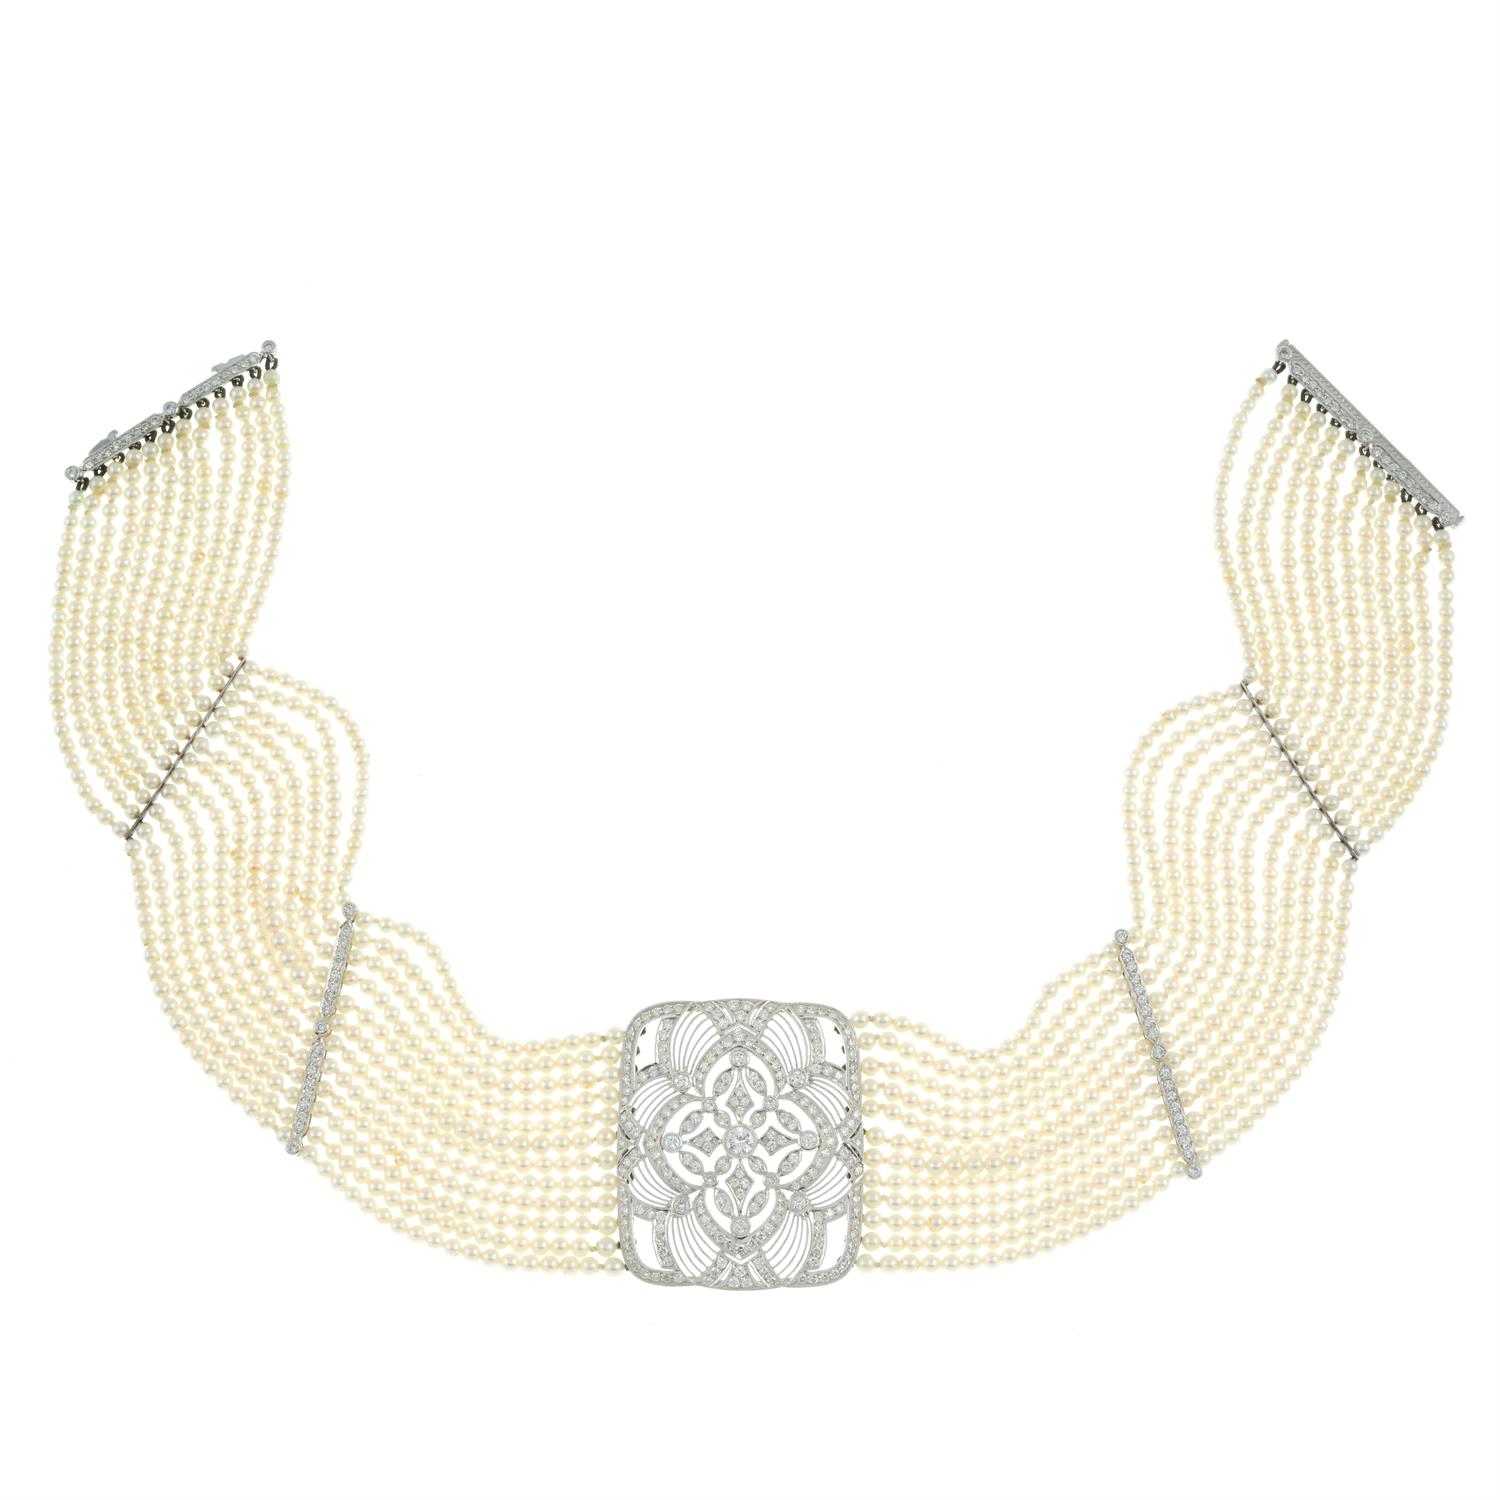 Seed pearl and diamond choker necklace, by Adler - Bild 5 aus 6